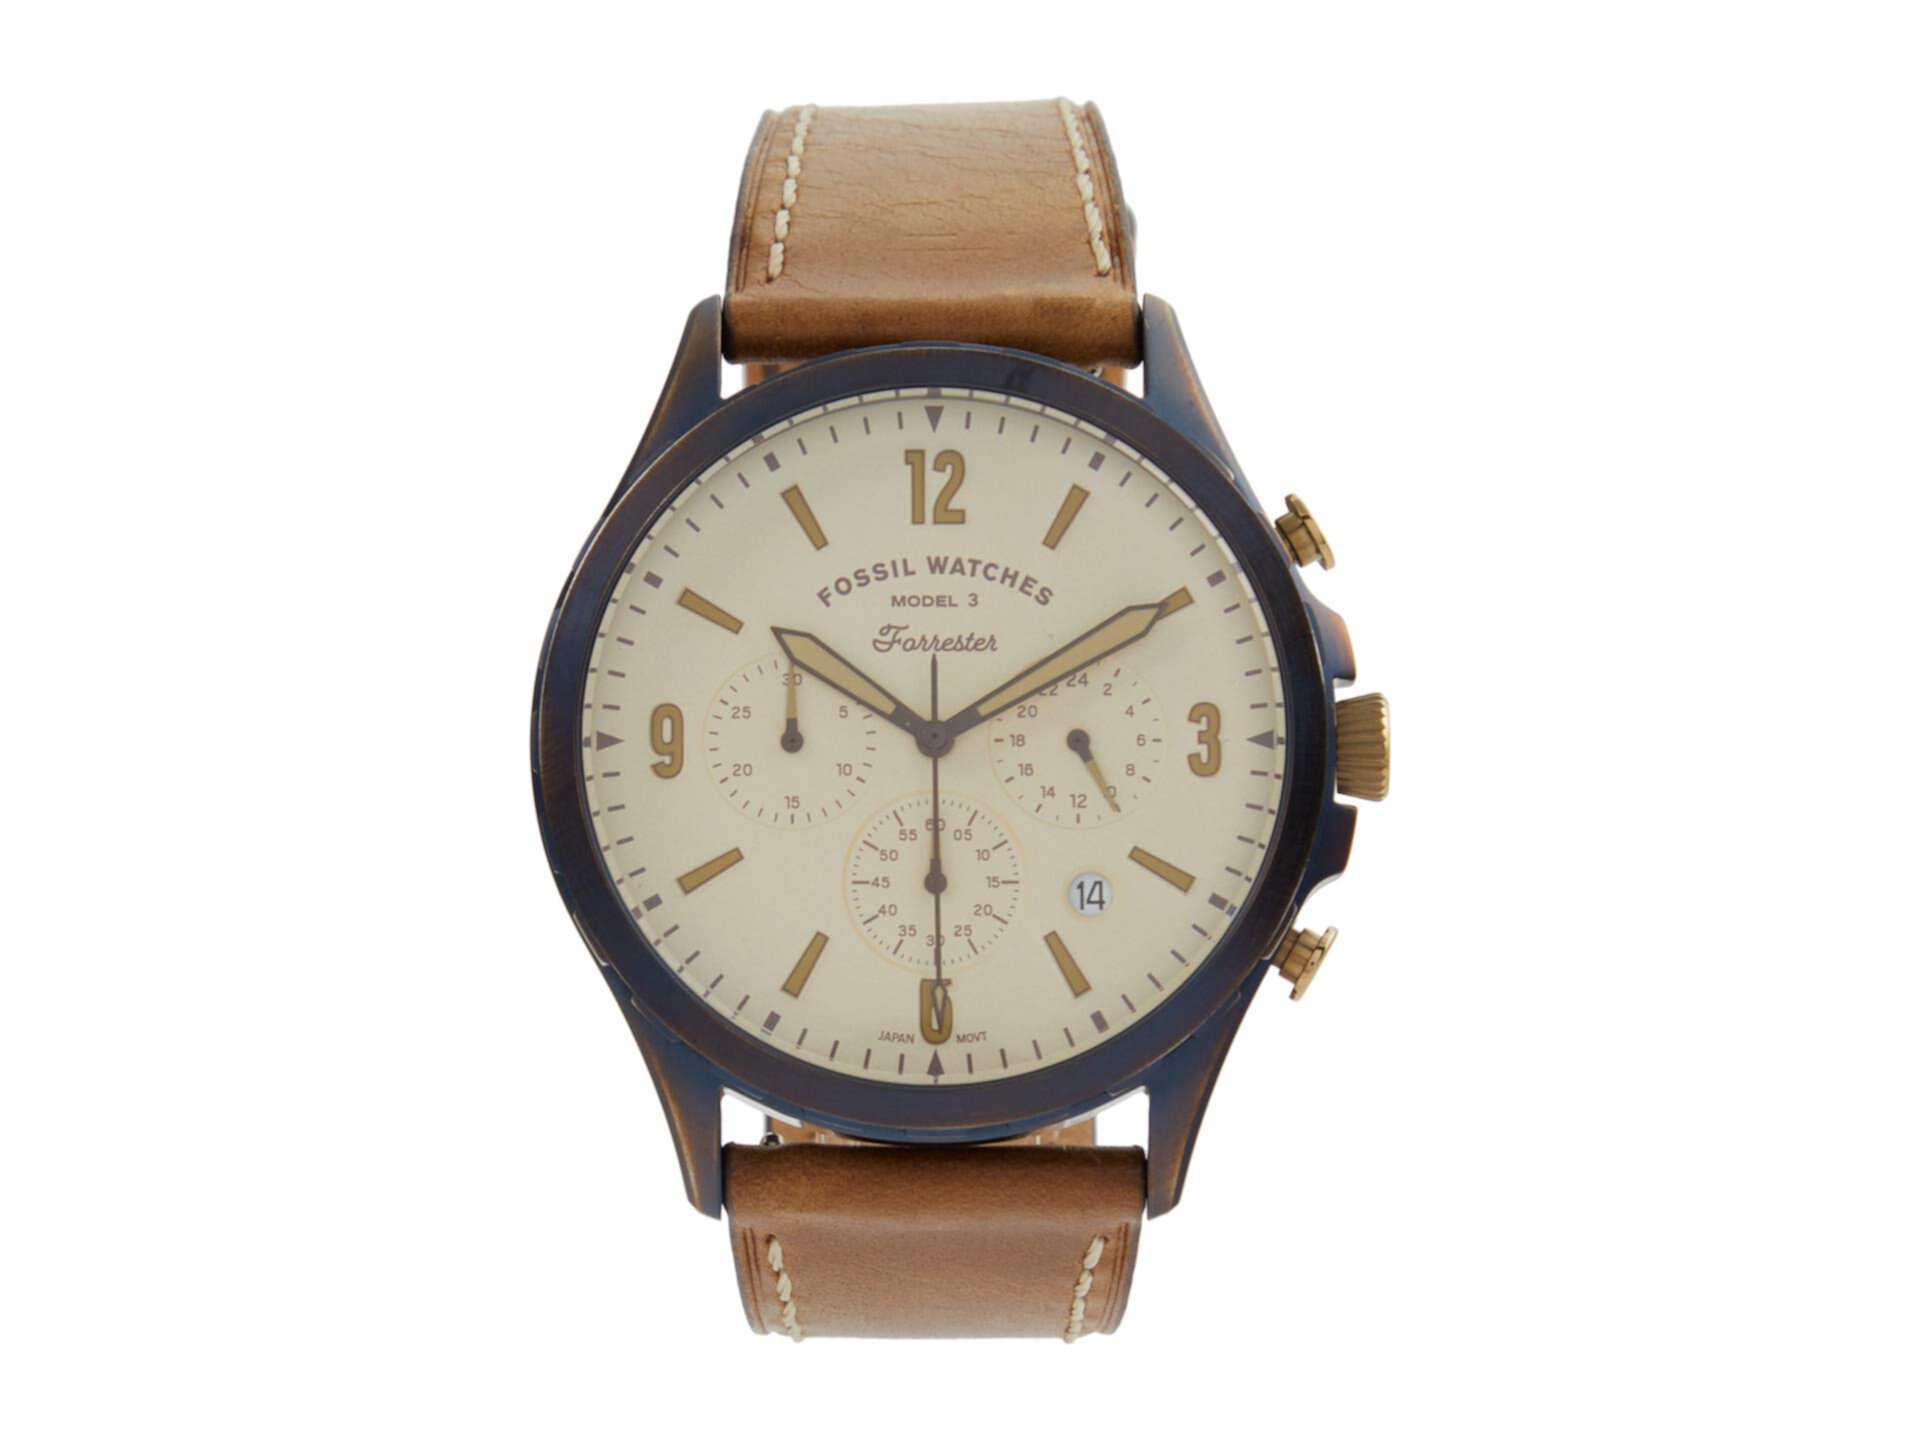 Forrester Chronograph Watch - LE1109 Fossil